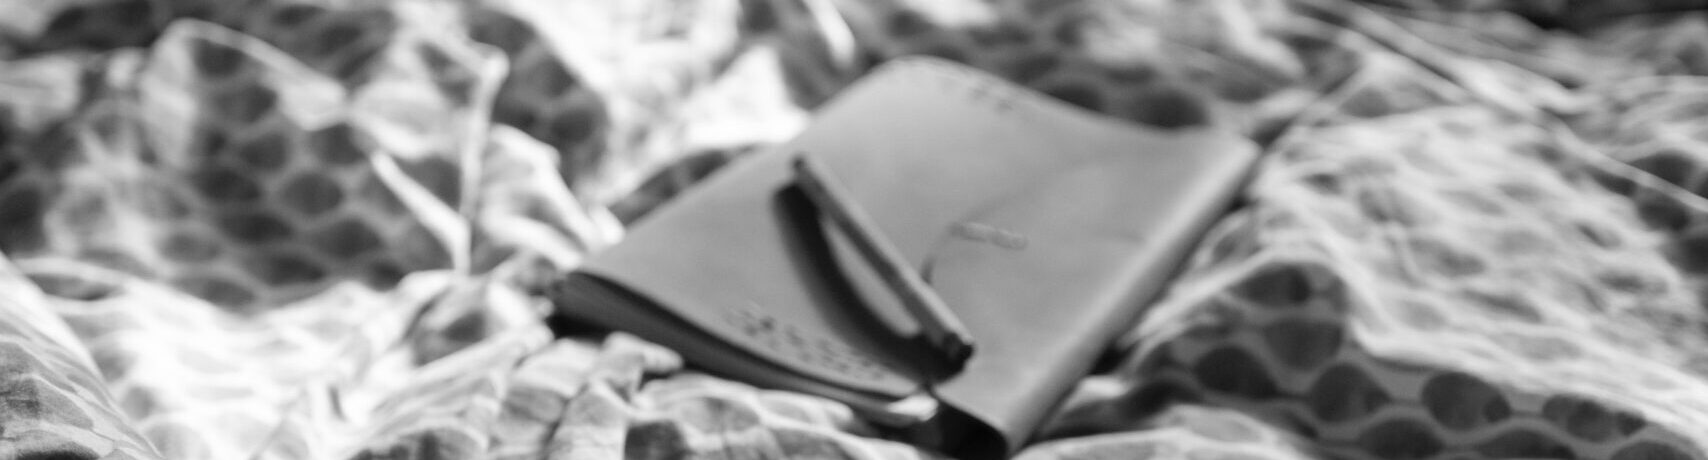 notepad on bed